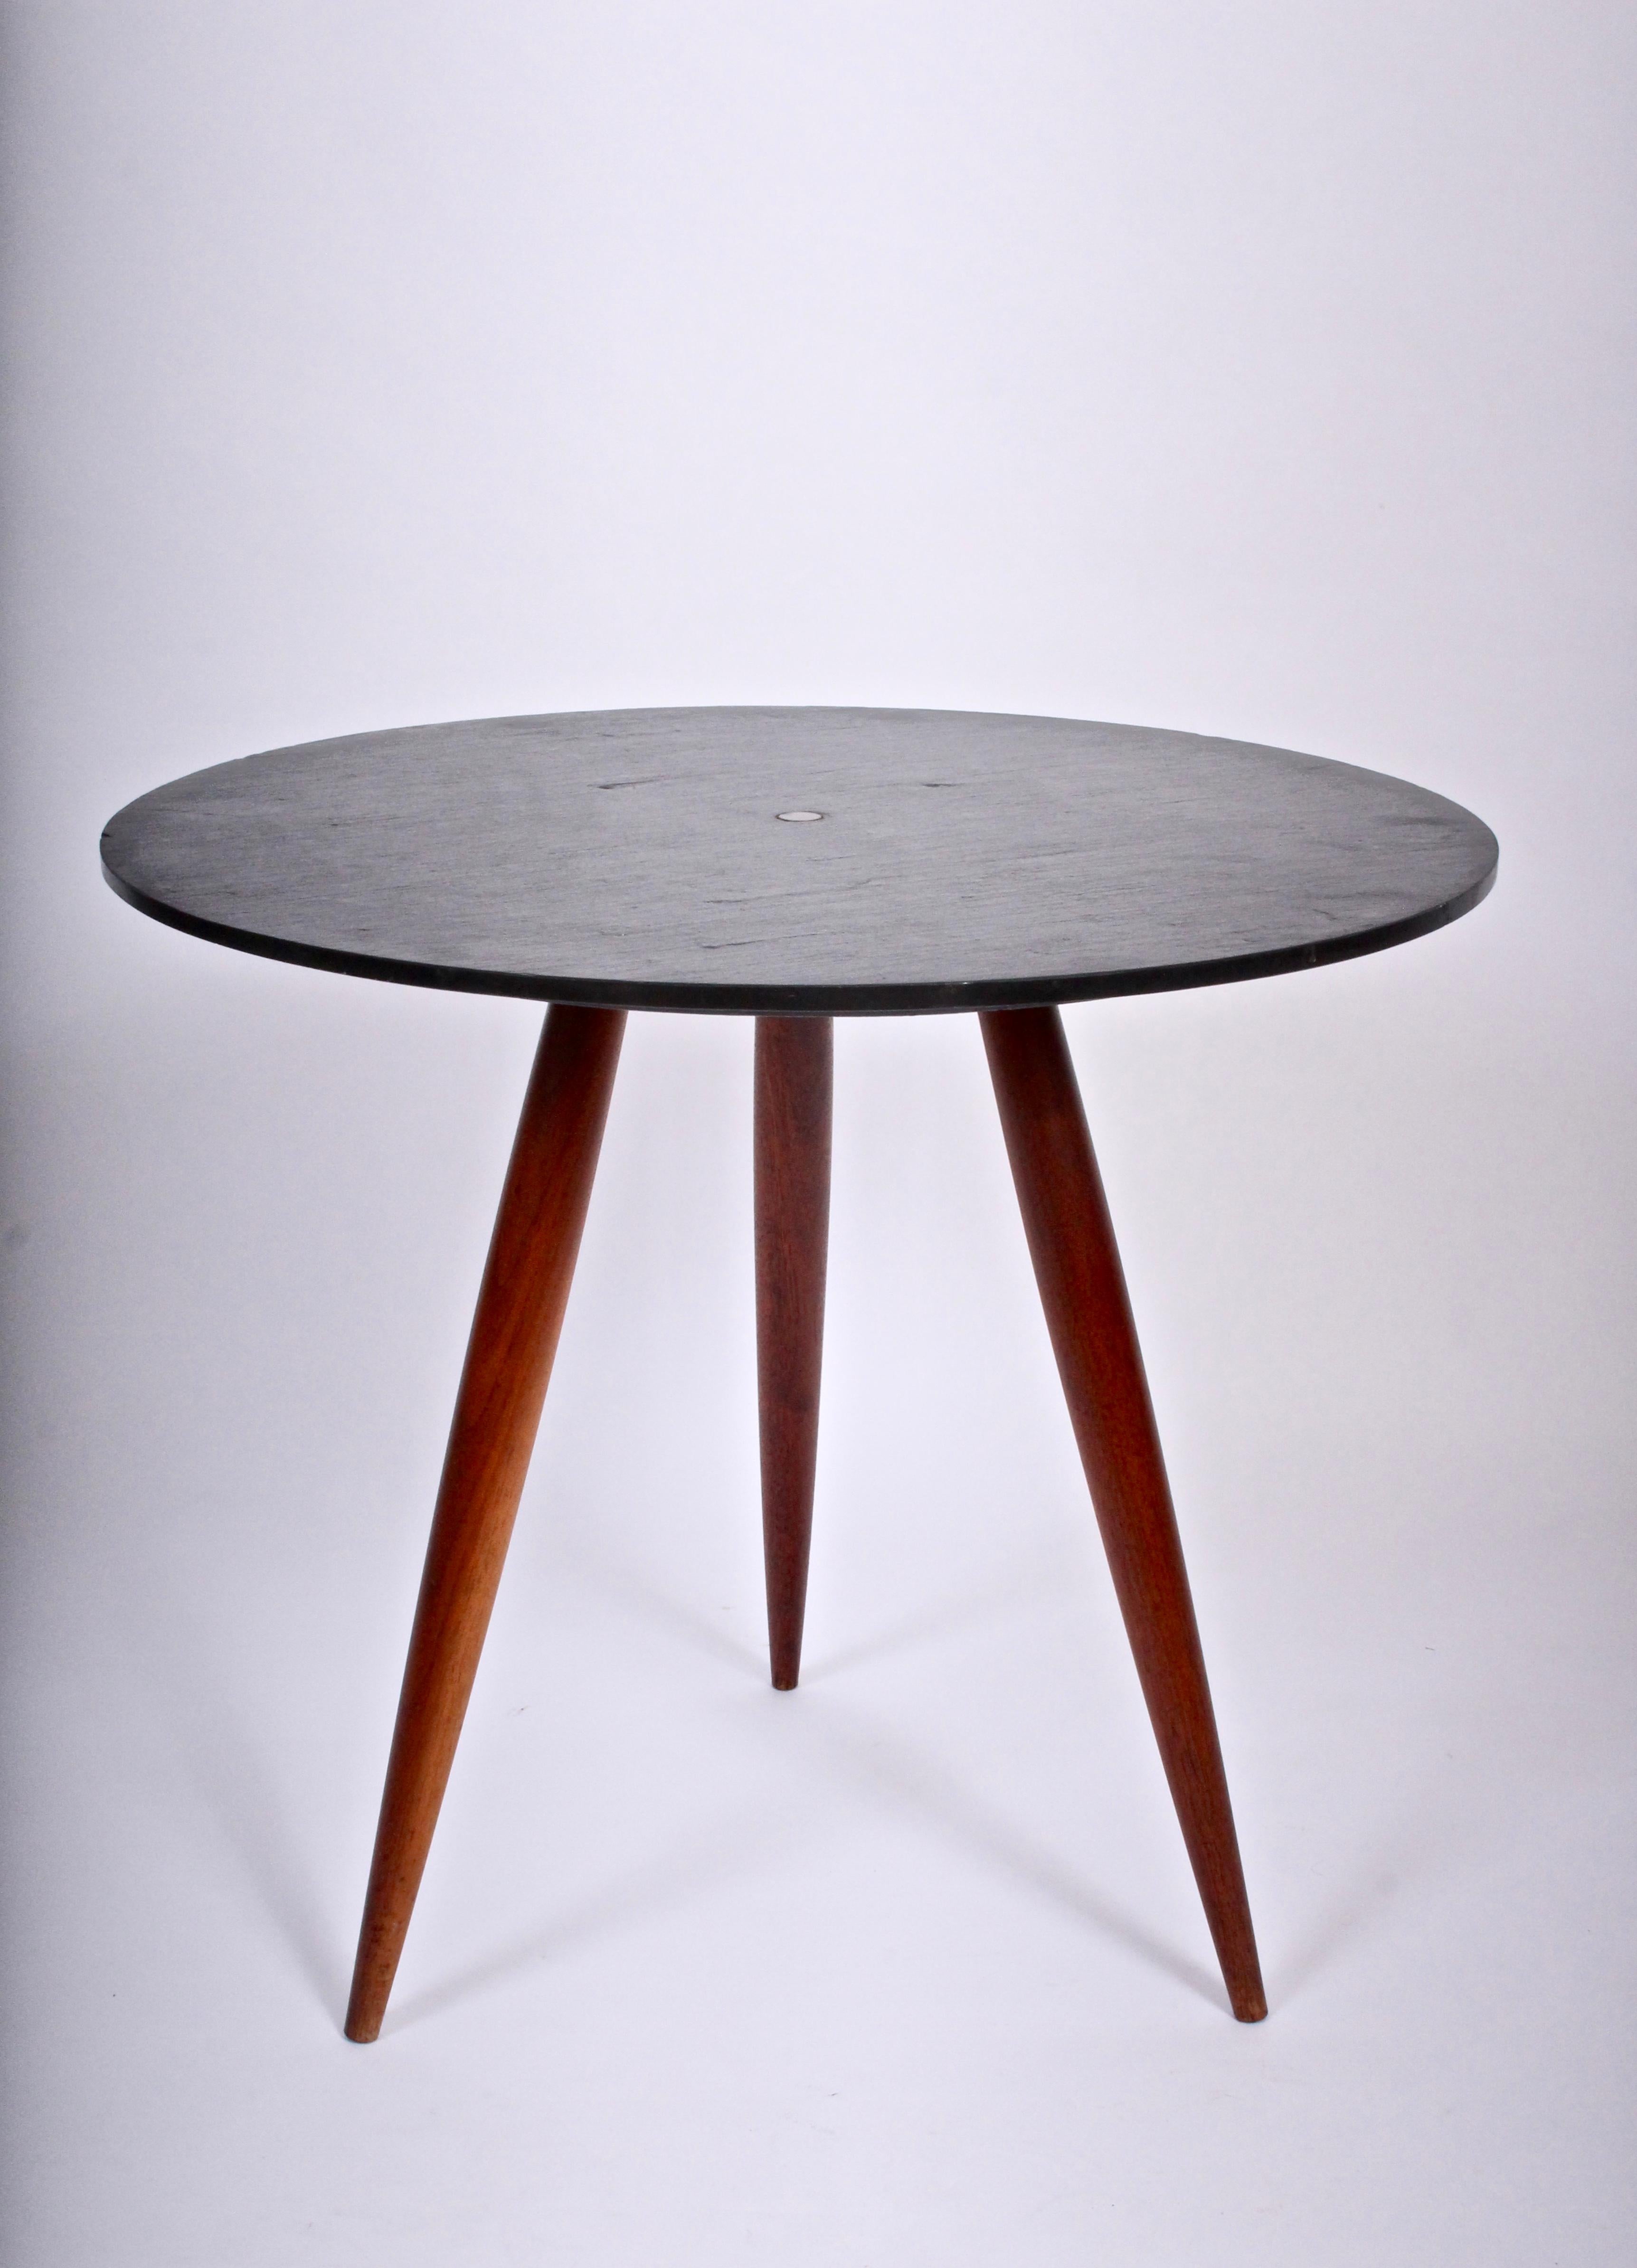 Early Phillip Lloyd Powell tri leg walnut table with dark natural slate surface. Featuring three turned walnut legs, round natural cleft charcoal gray slate table top, classic round flat center brass pin. Balanced. Modernist. Rarity.  Additional